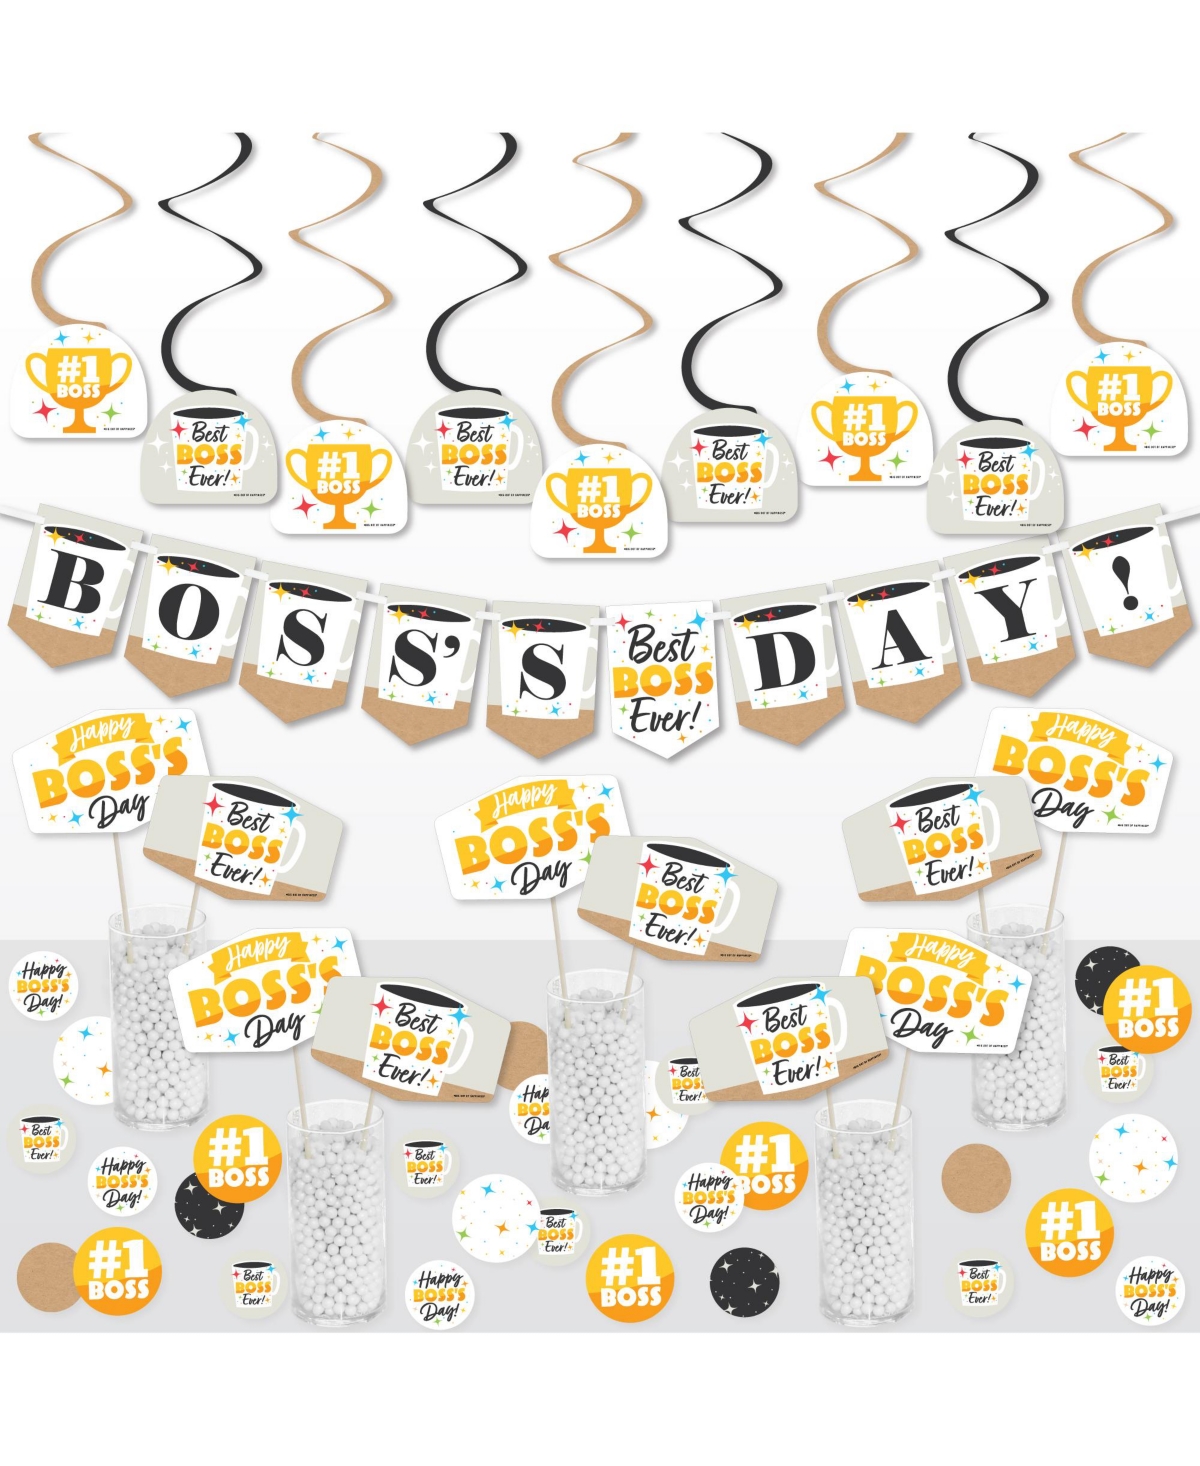 Big Dot of Happiness Happy Bosss Day - Best Boss Ever Supplies Decoration Kit - Decor Galore Party Pack - 51 Pieces